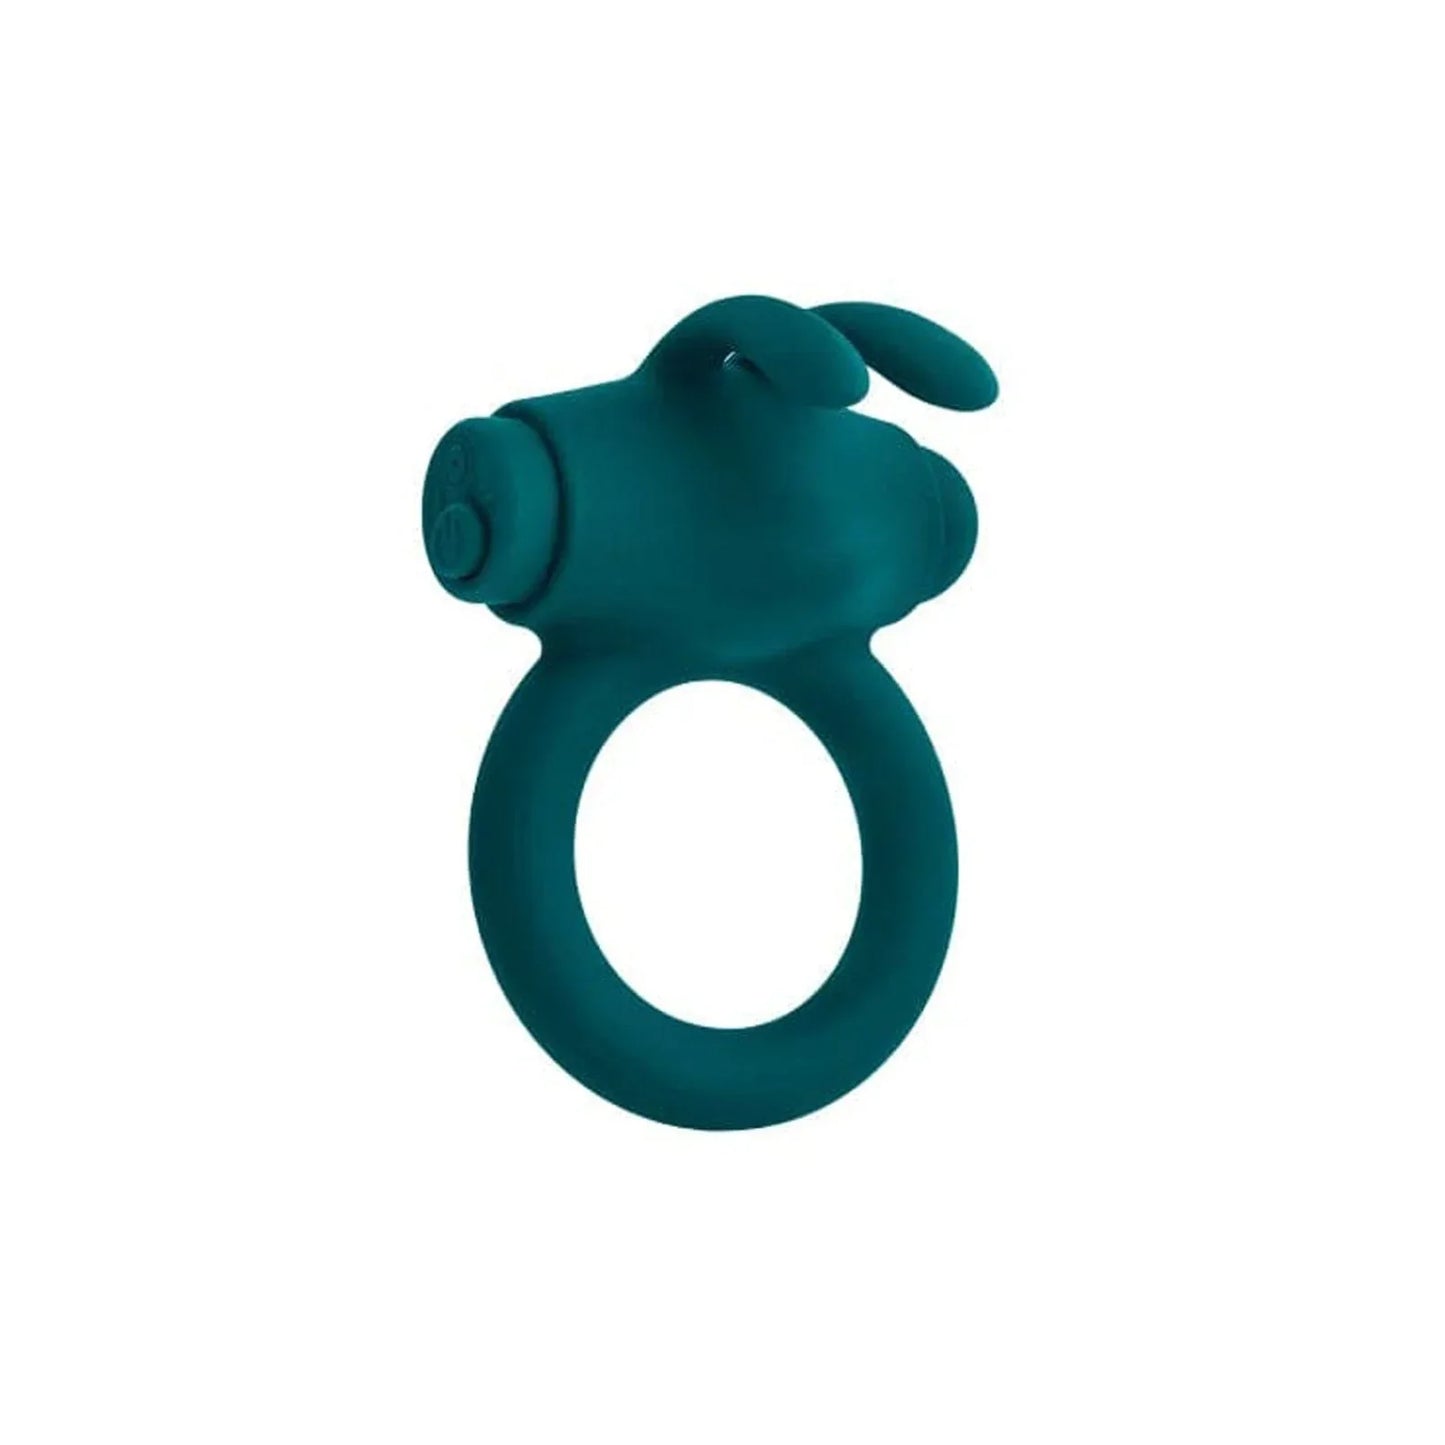 Playboy Bunny Buzzer Cock Ring In Teal